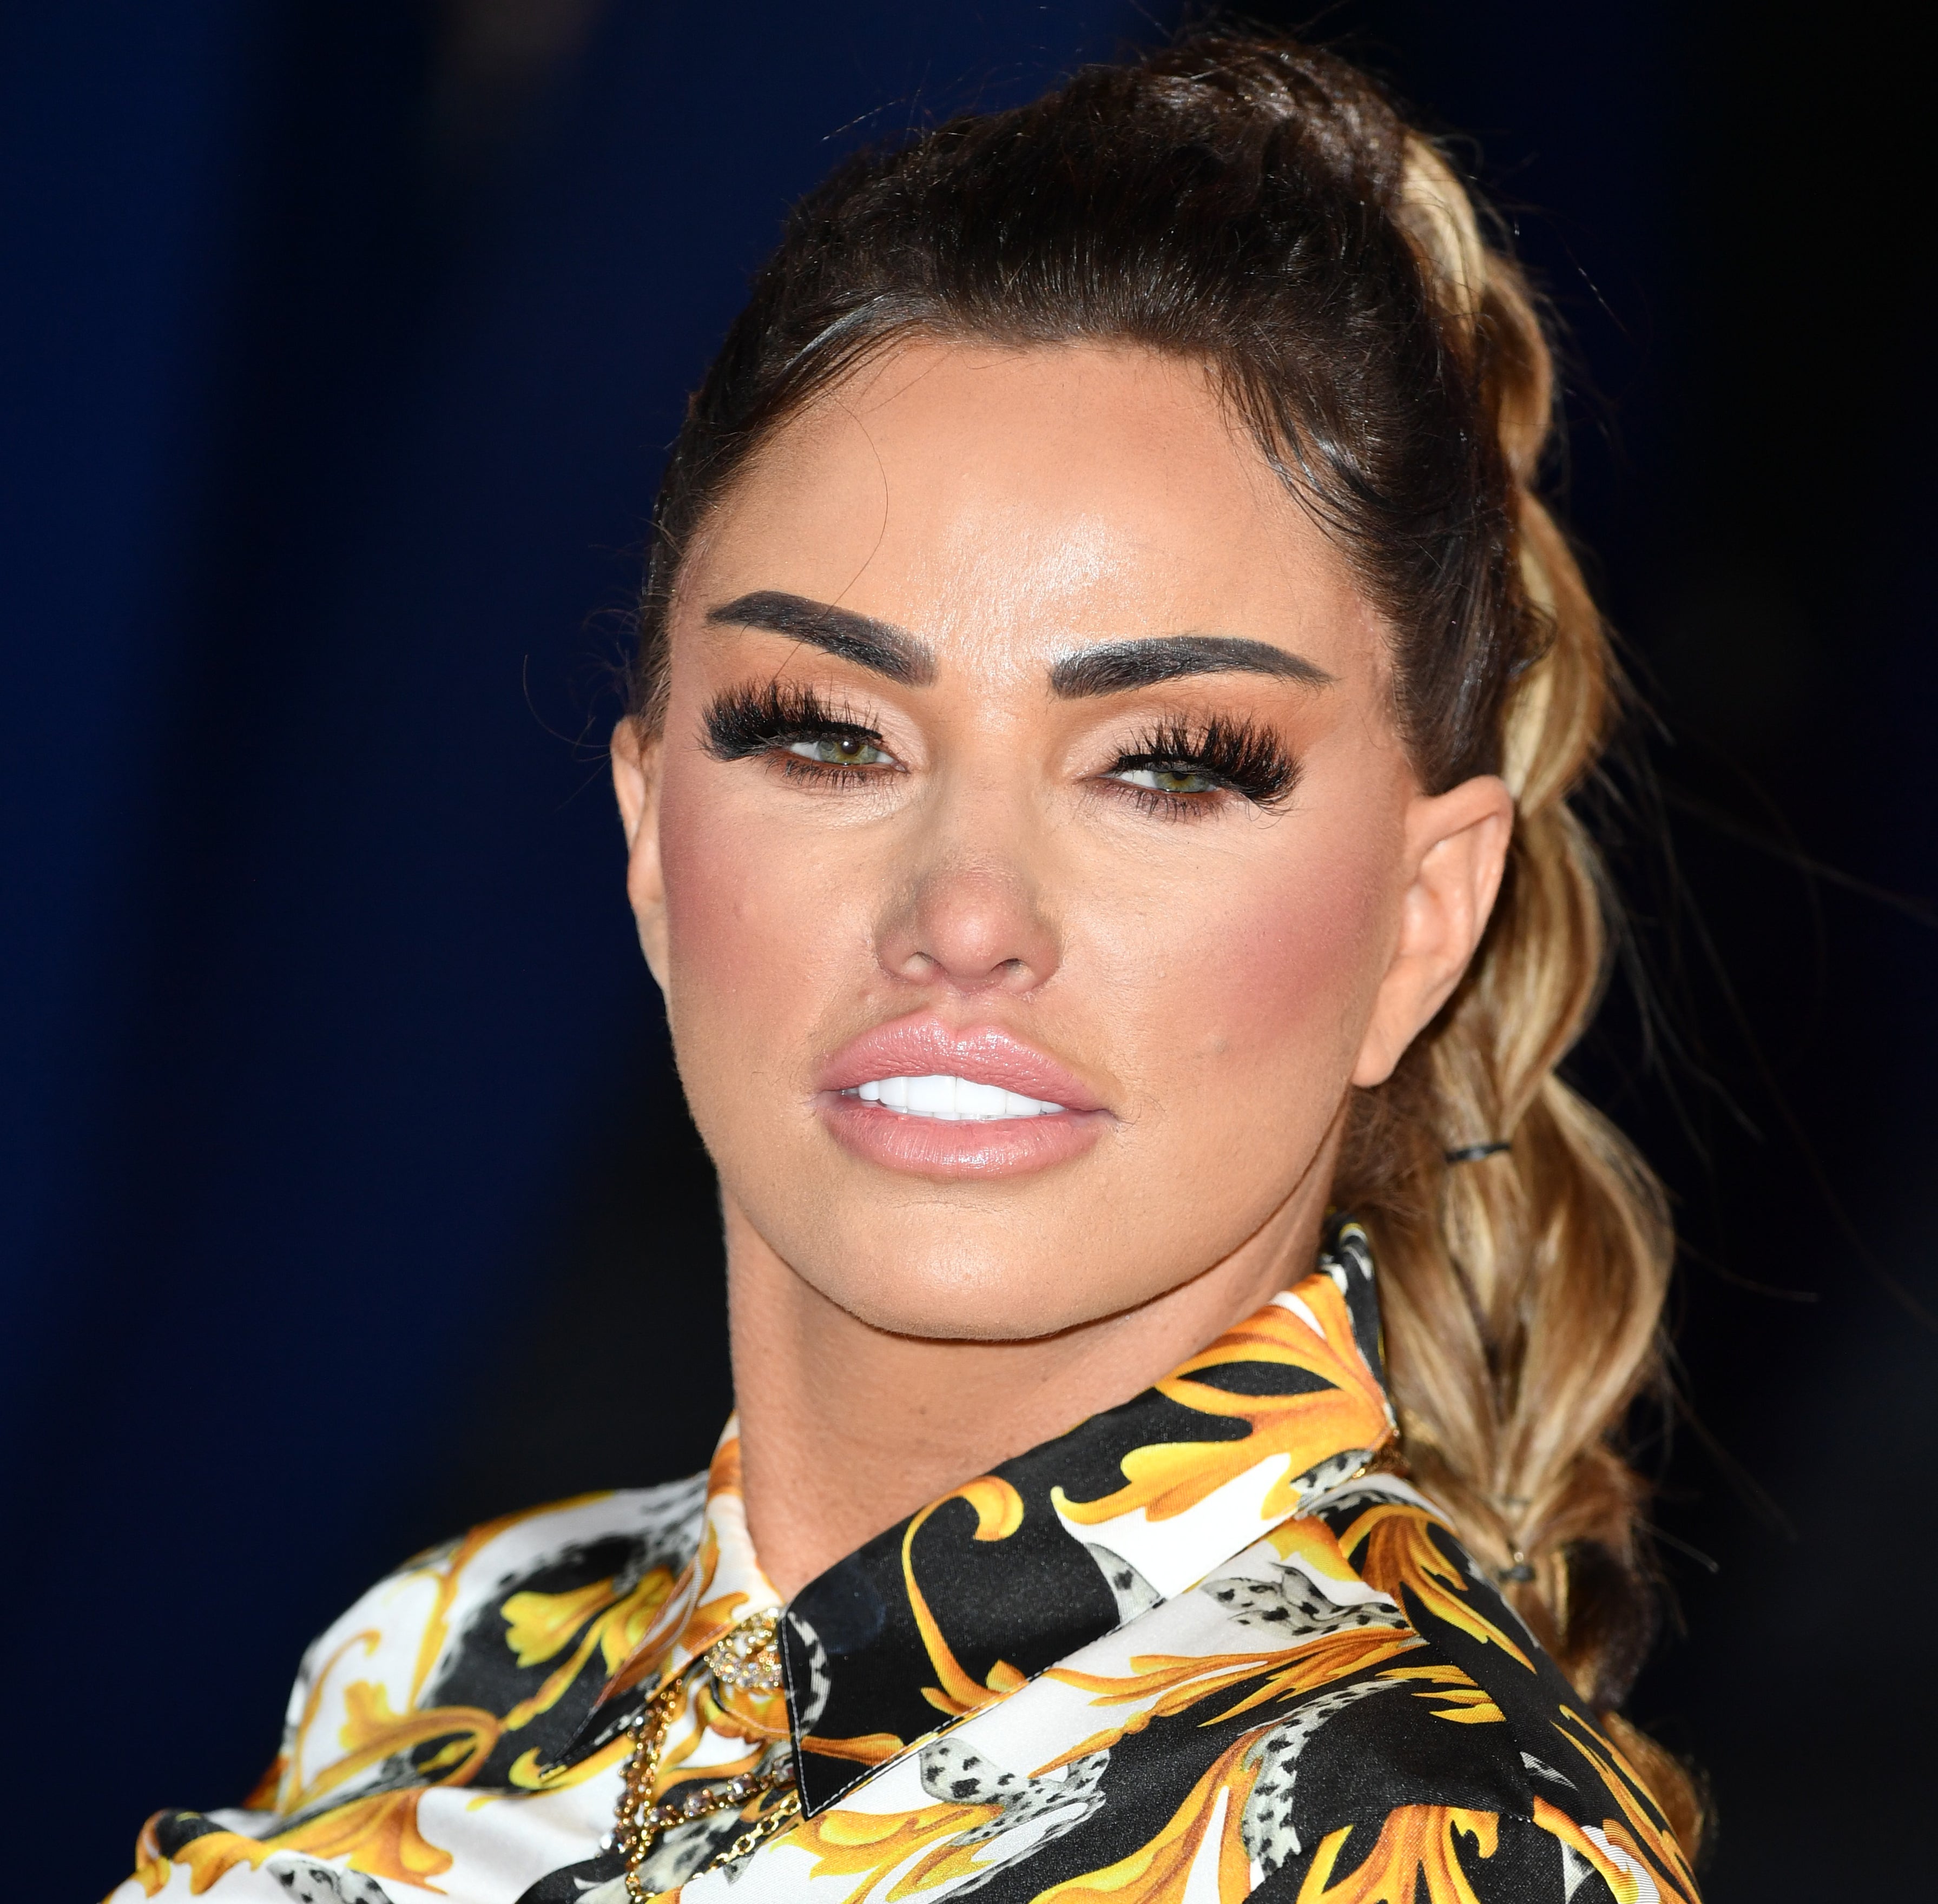 Katie Price reveals she was raped at gunpoint in South Africa carjacking The Independent pic